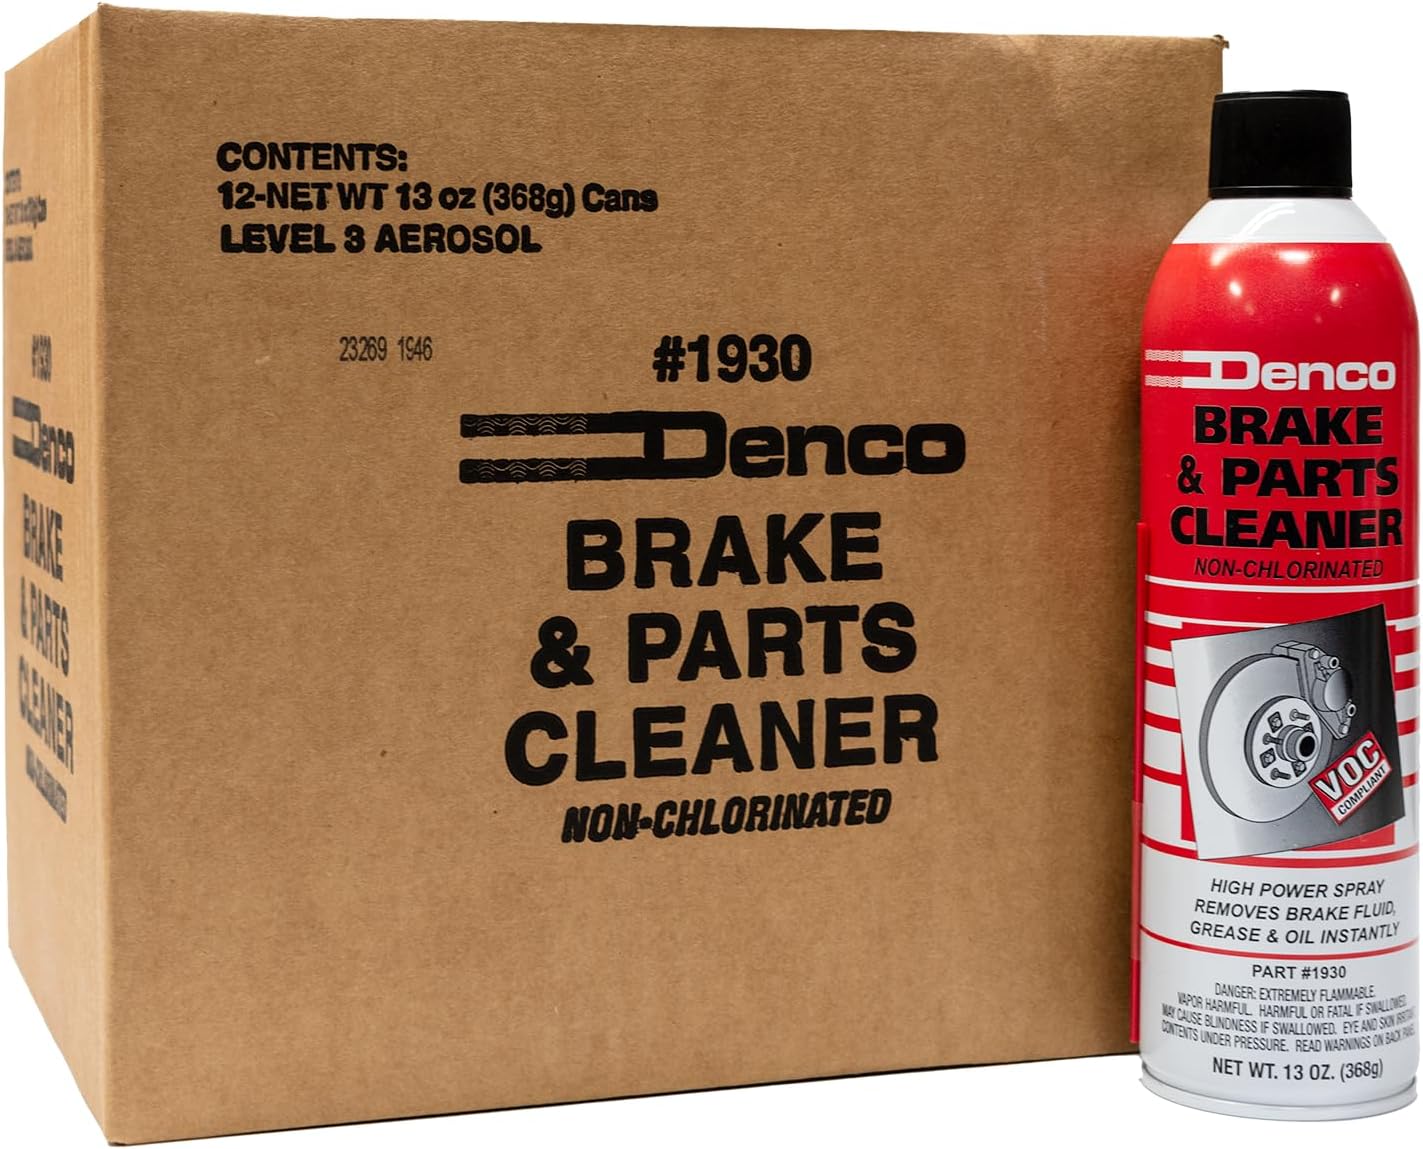 Denco 1930 Industrial & Automotive Brake and Parts Cleaner - High-Efficiency, Non-Chlorinated Formula